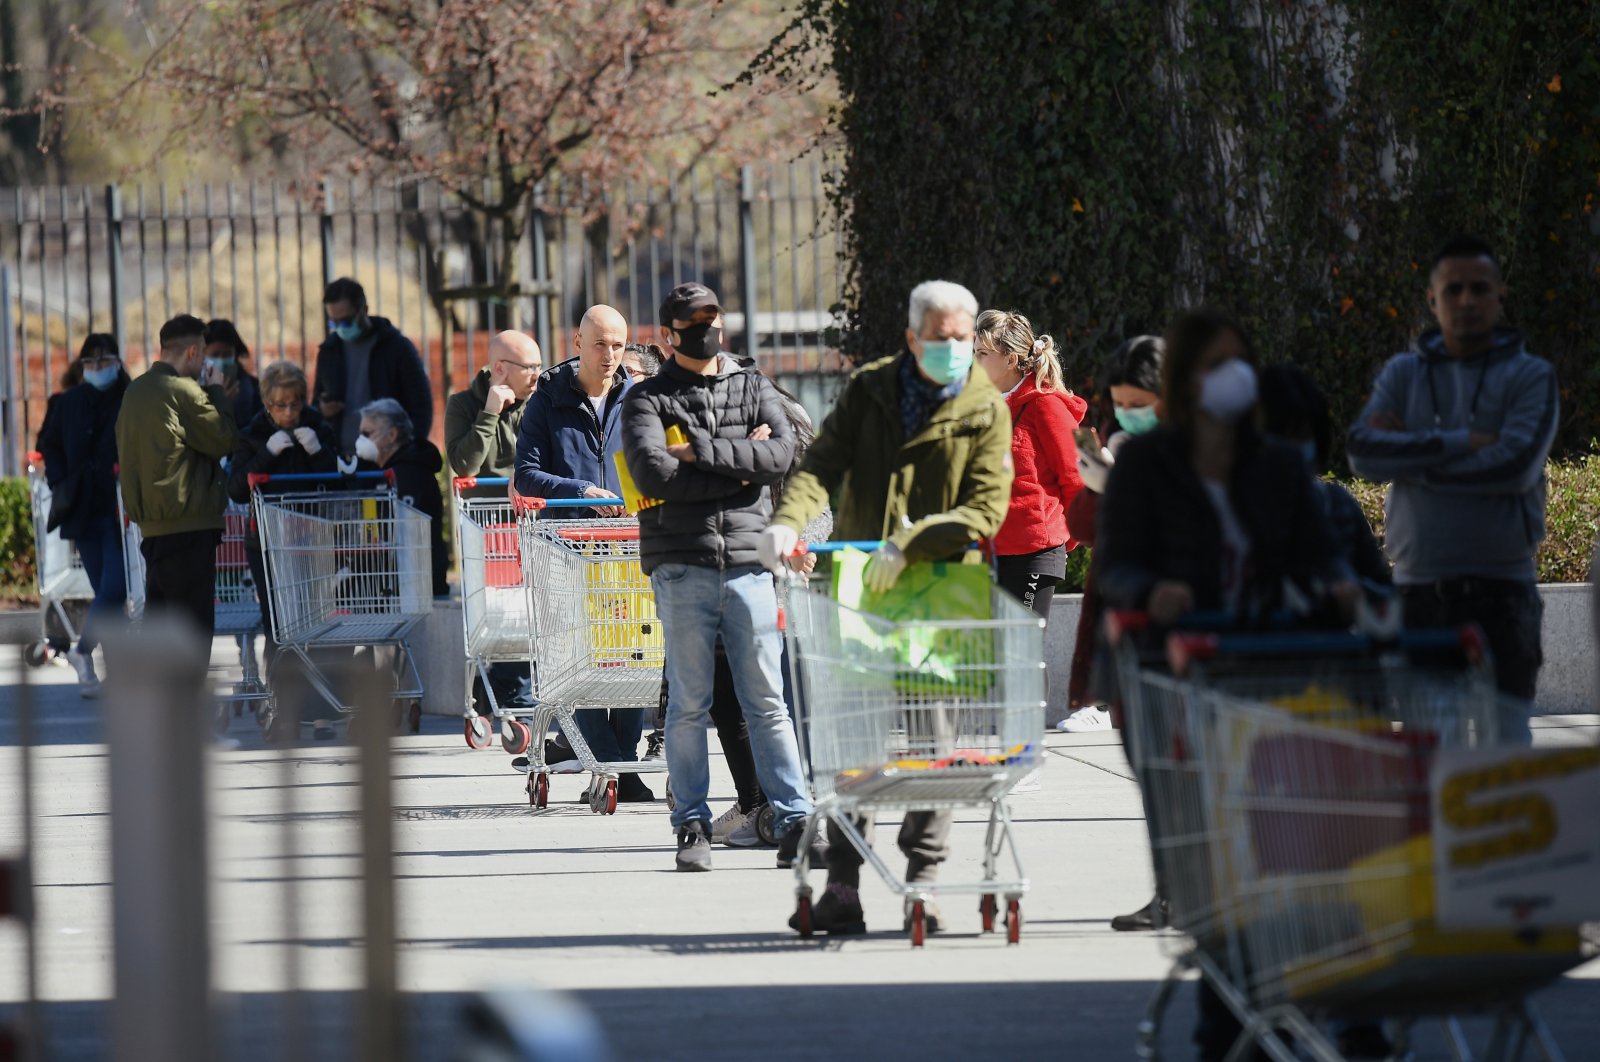 People wait in front of a supermarket on the second day of the lockdown across the country imposed to slow the outbreak of the novel coronavirus, Milan, Italy, Wednesday, March 11, 2020. (Reuters Photo)